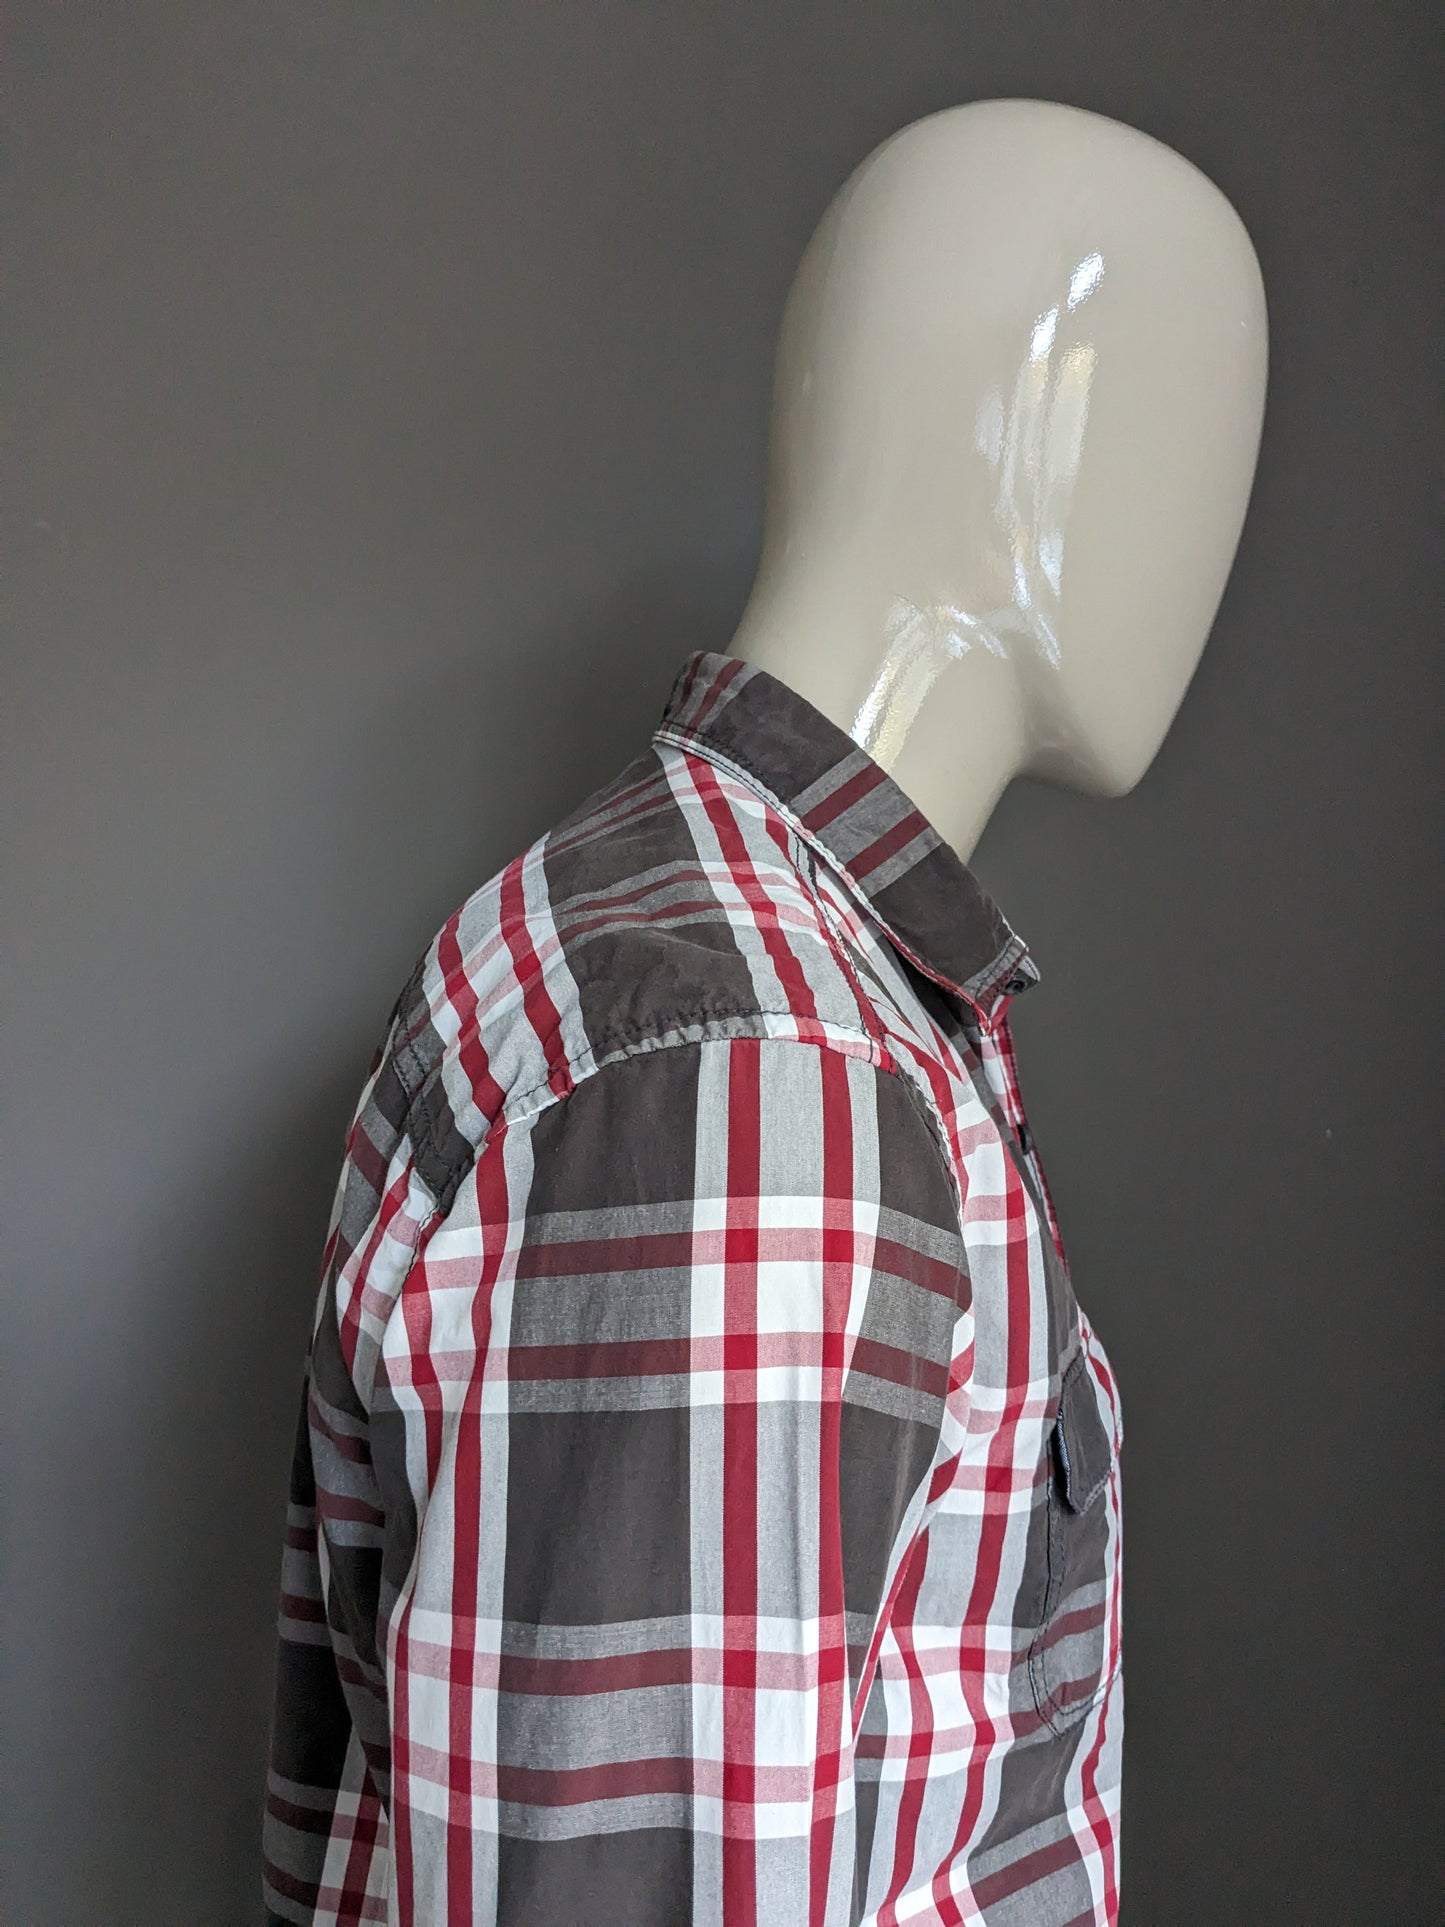 s.Oliver shirt. Brown red white checkered. Size L. Slim Fit.